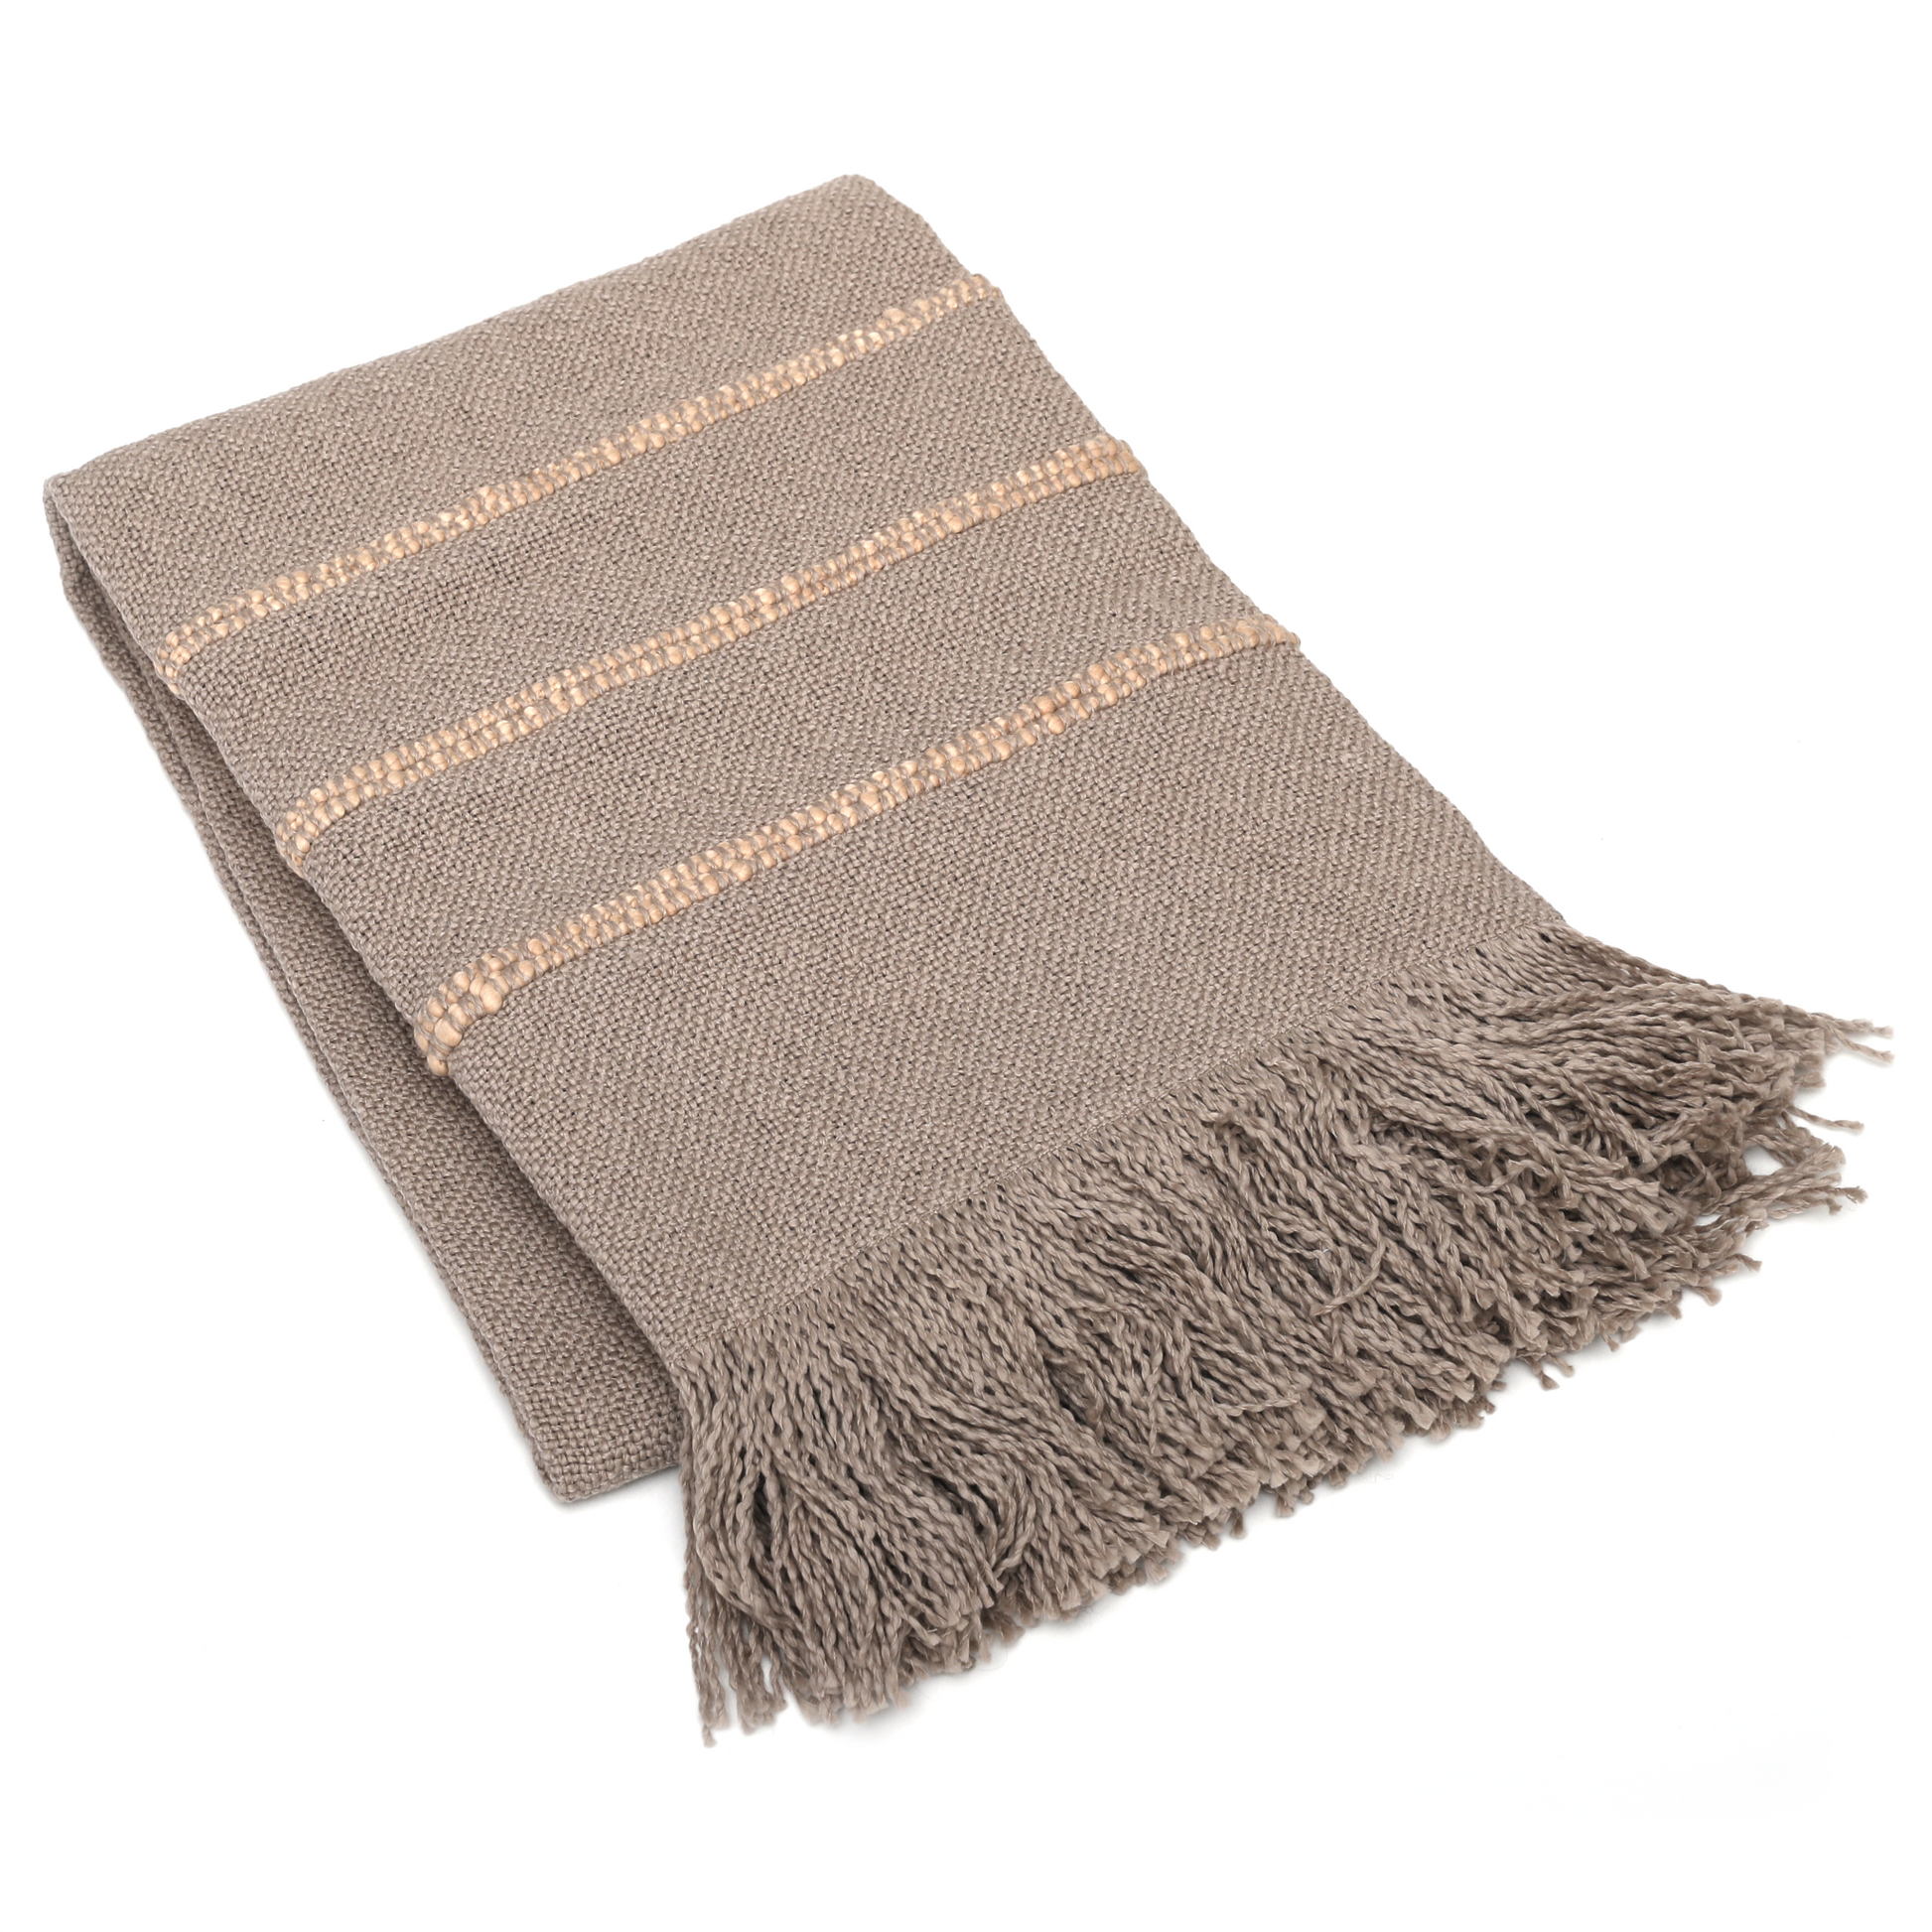 Intiearth_Caral_collection_organic_cotton_throw_blanket_taupe_and_terracotta_stripe.jpg